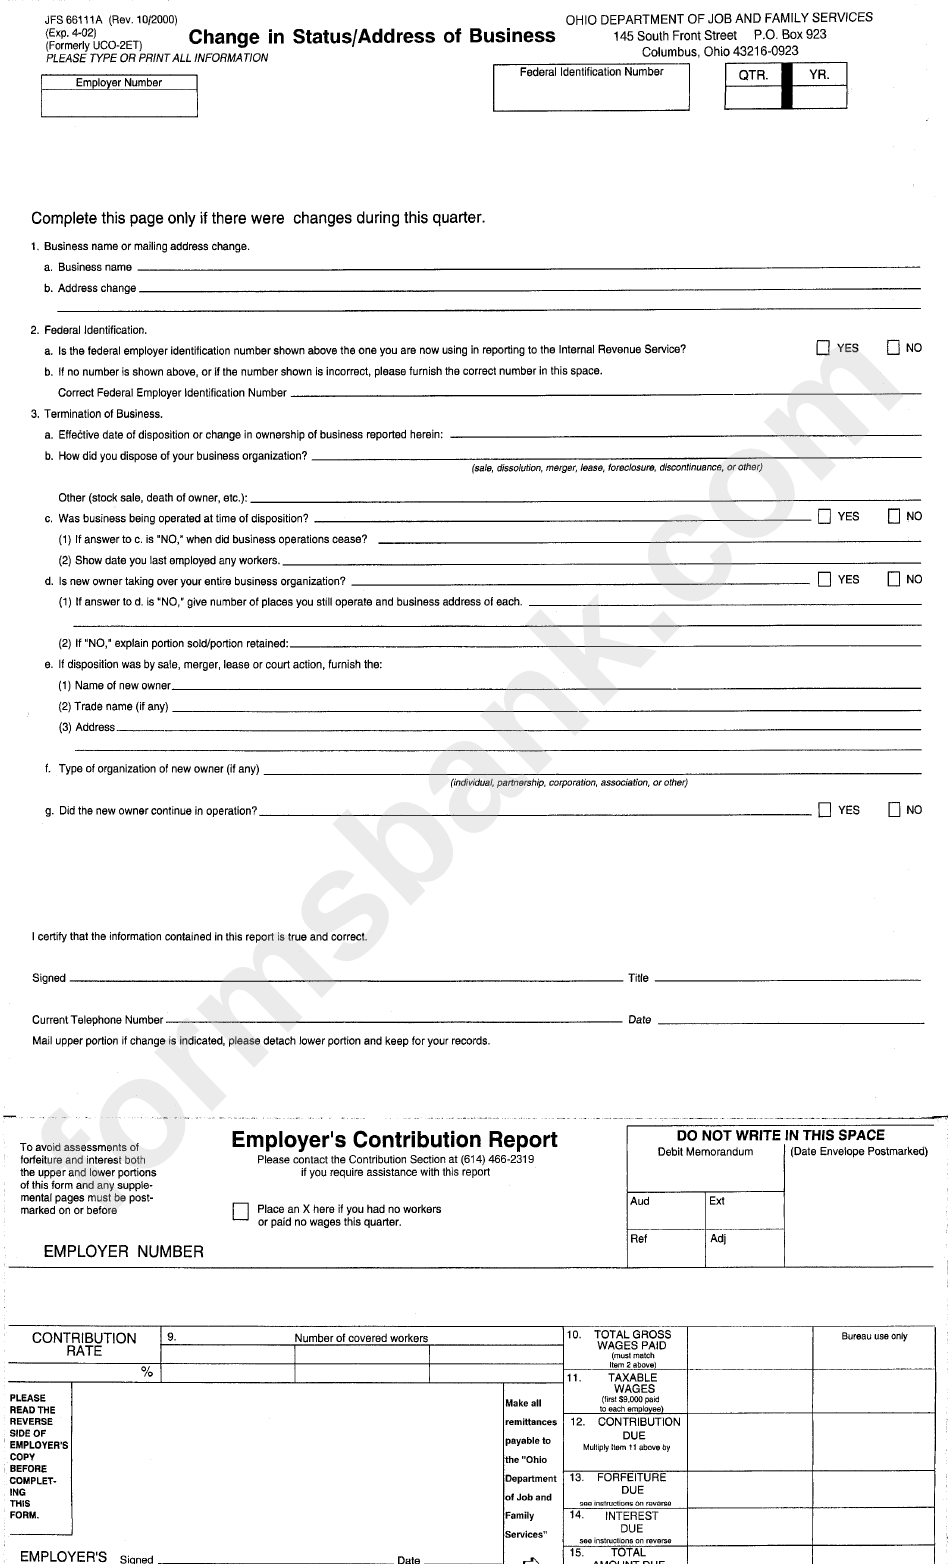 Form For Change In Status/address Of Business